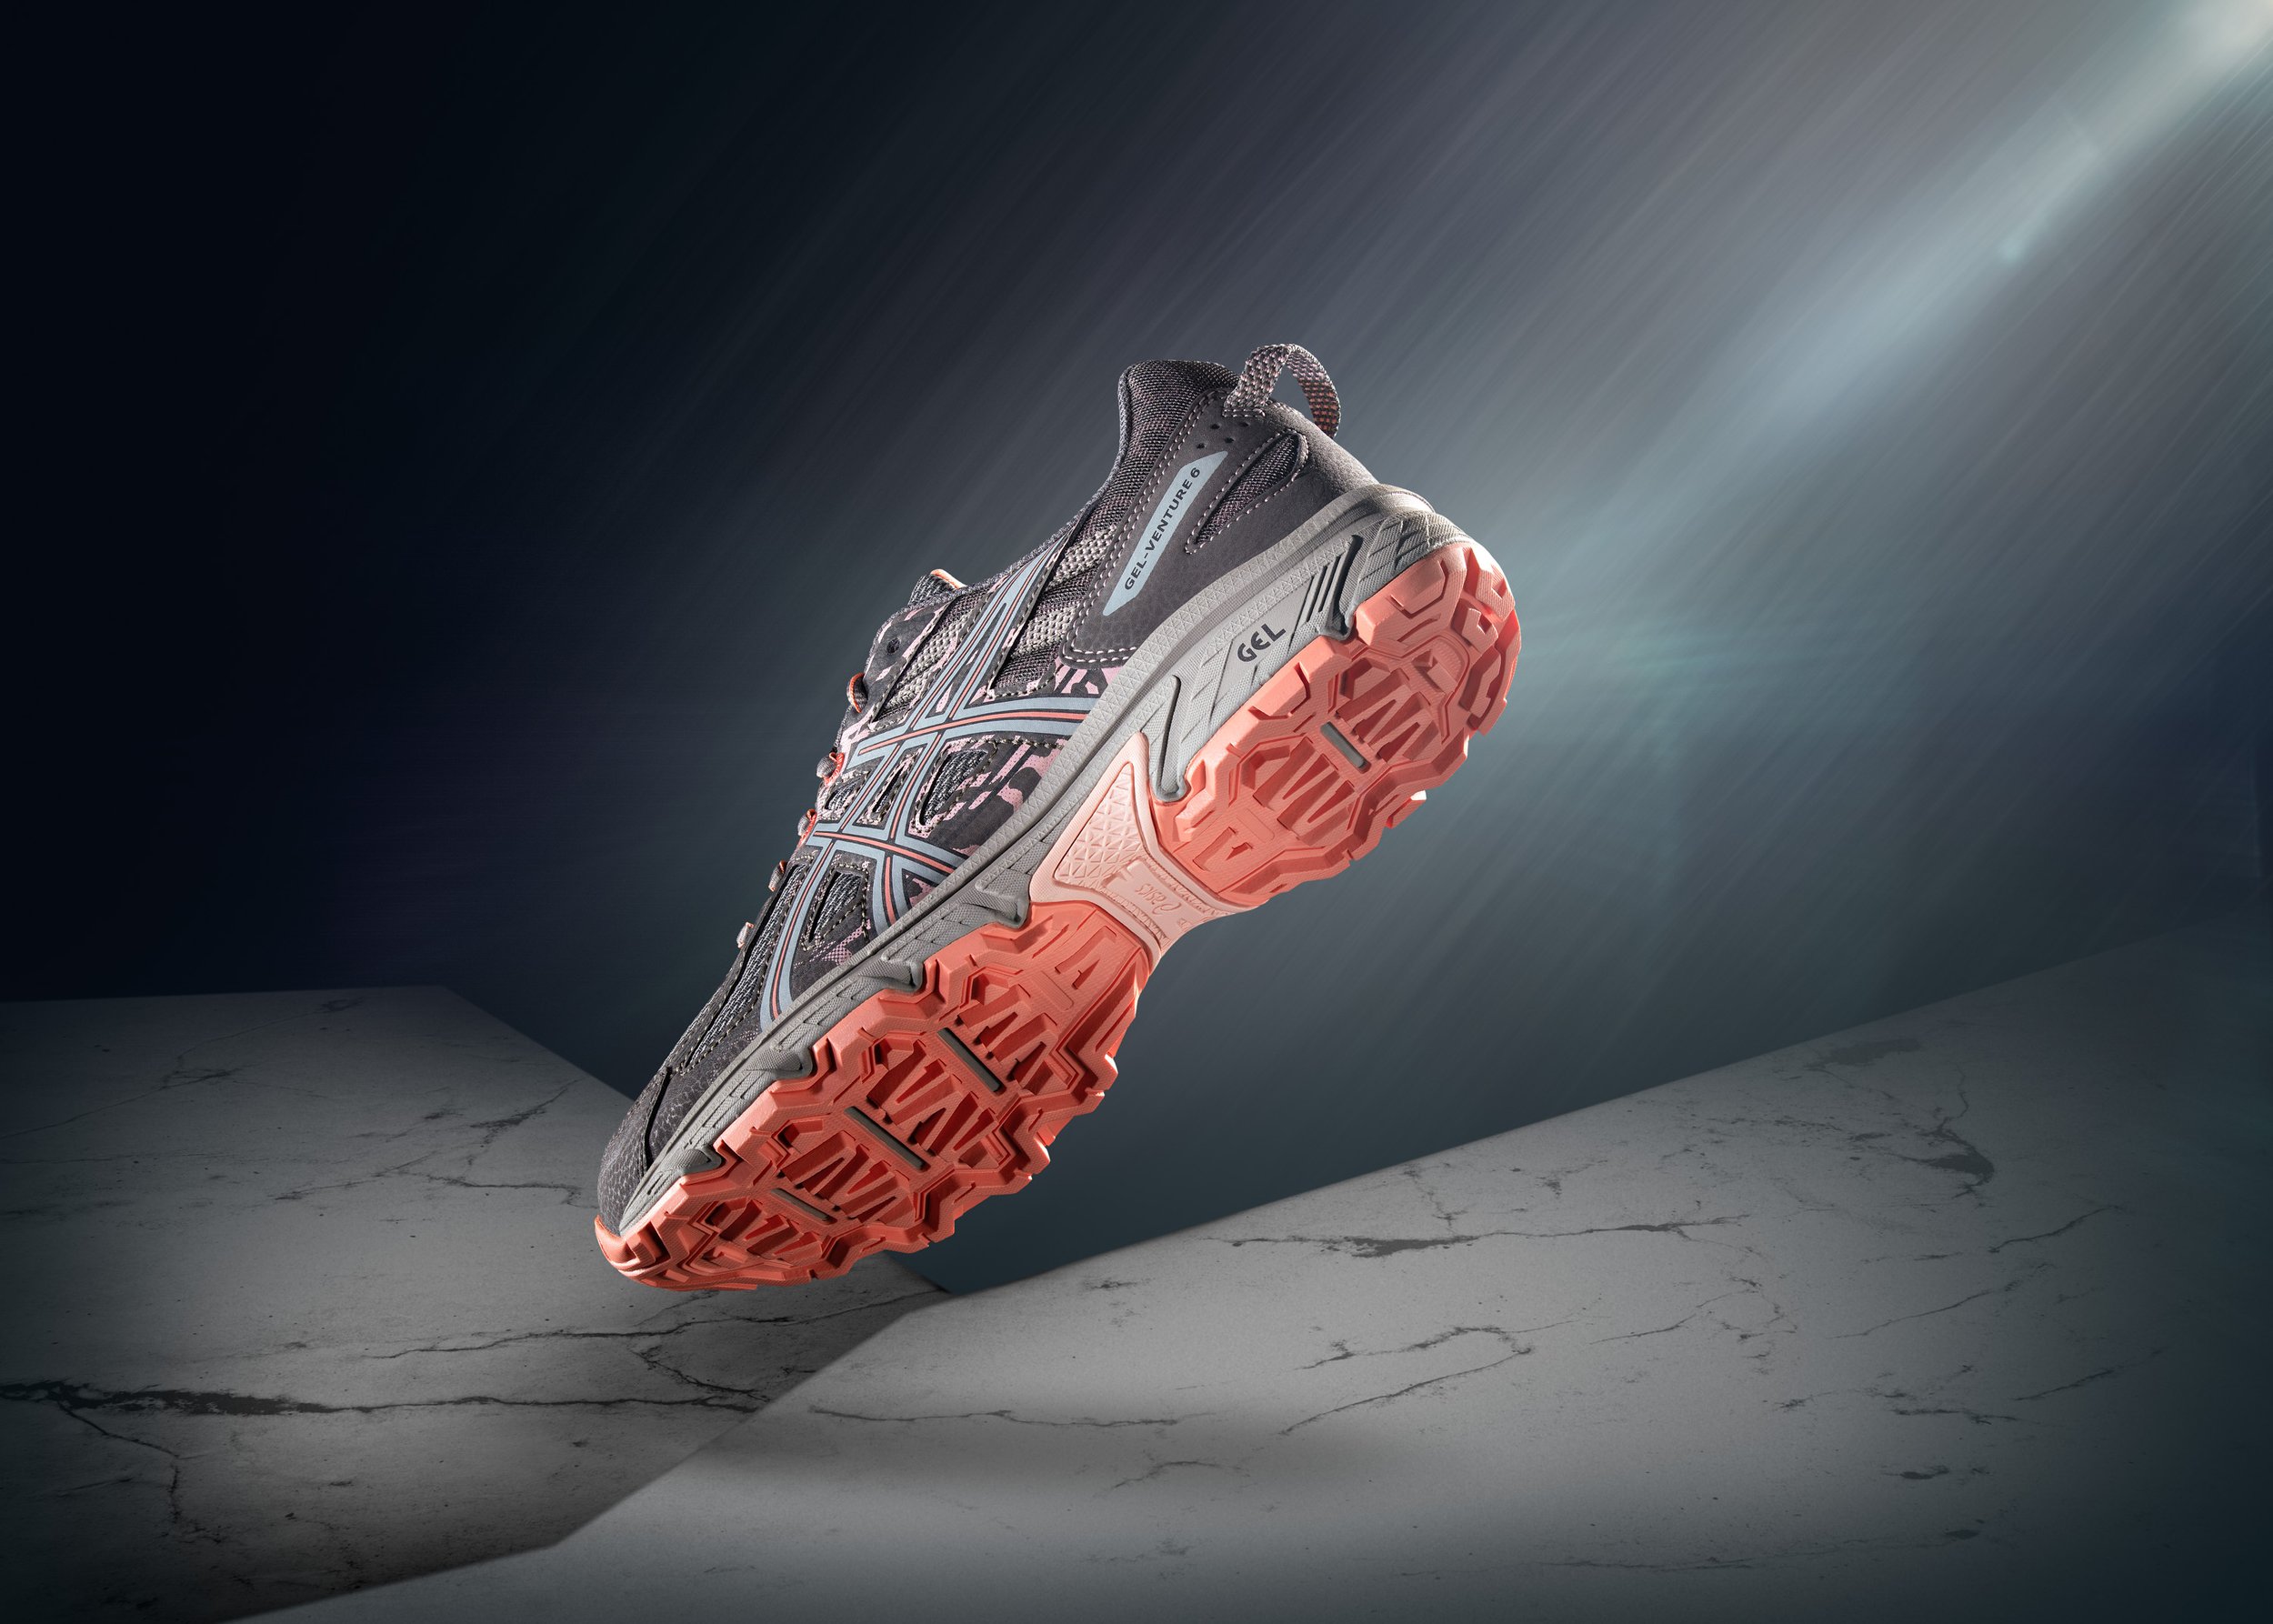 Asics Gel Ladies Running Shoe | Commercial Product Shot (Copy)